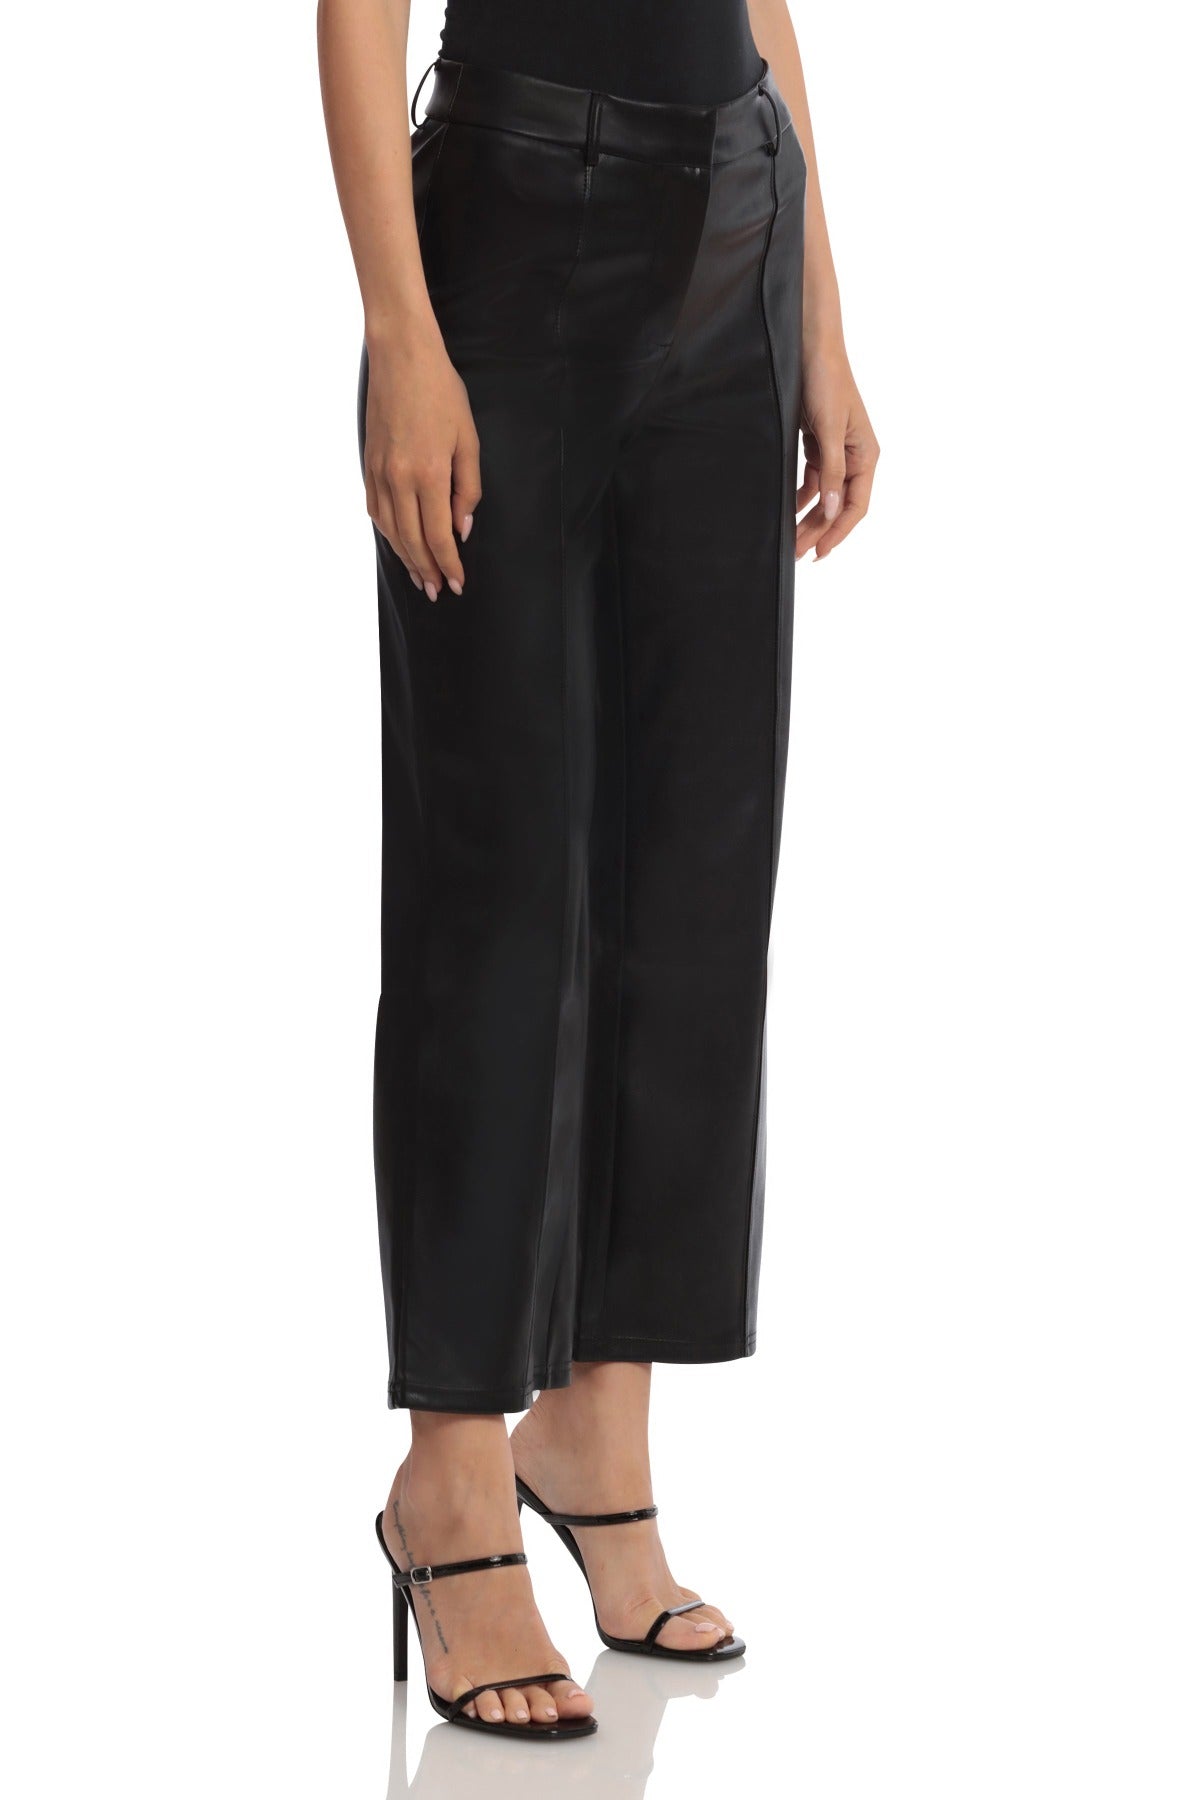 Faux Leather Seam-Front Straight Leg Trouser Pants Black - Figure Flattering Office to Date Night Bottoms for Women